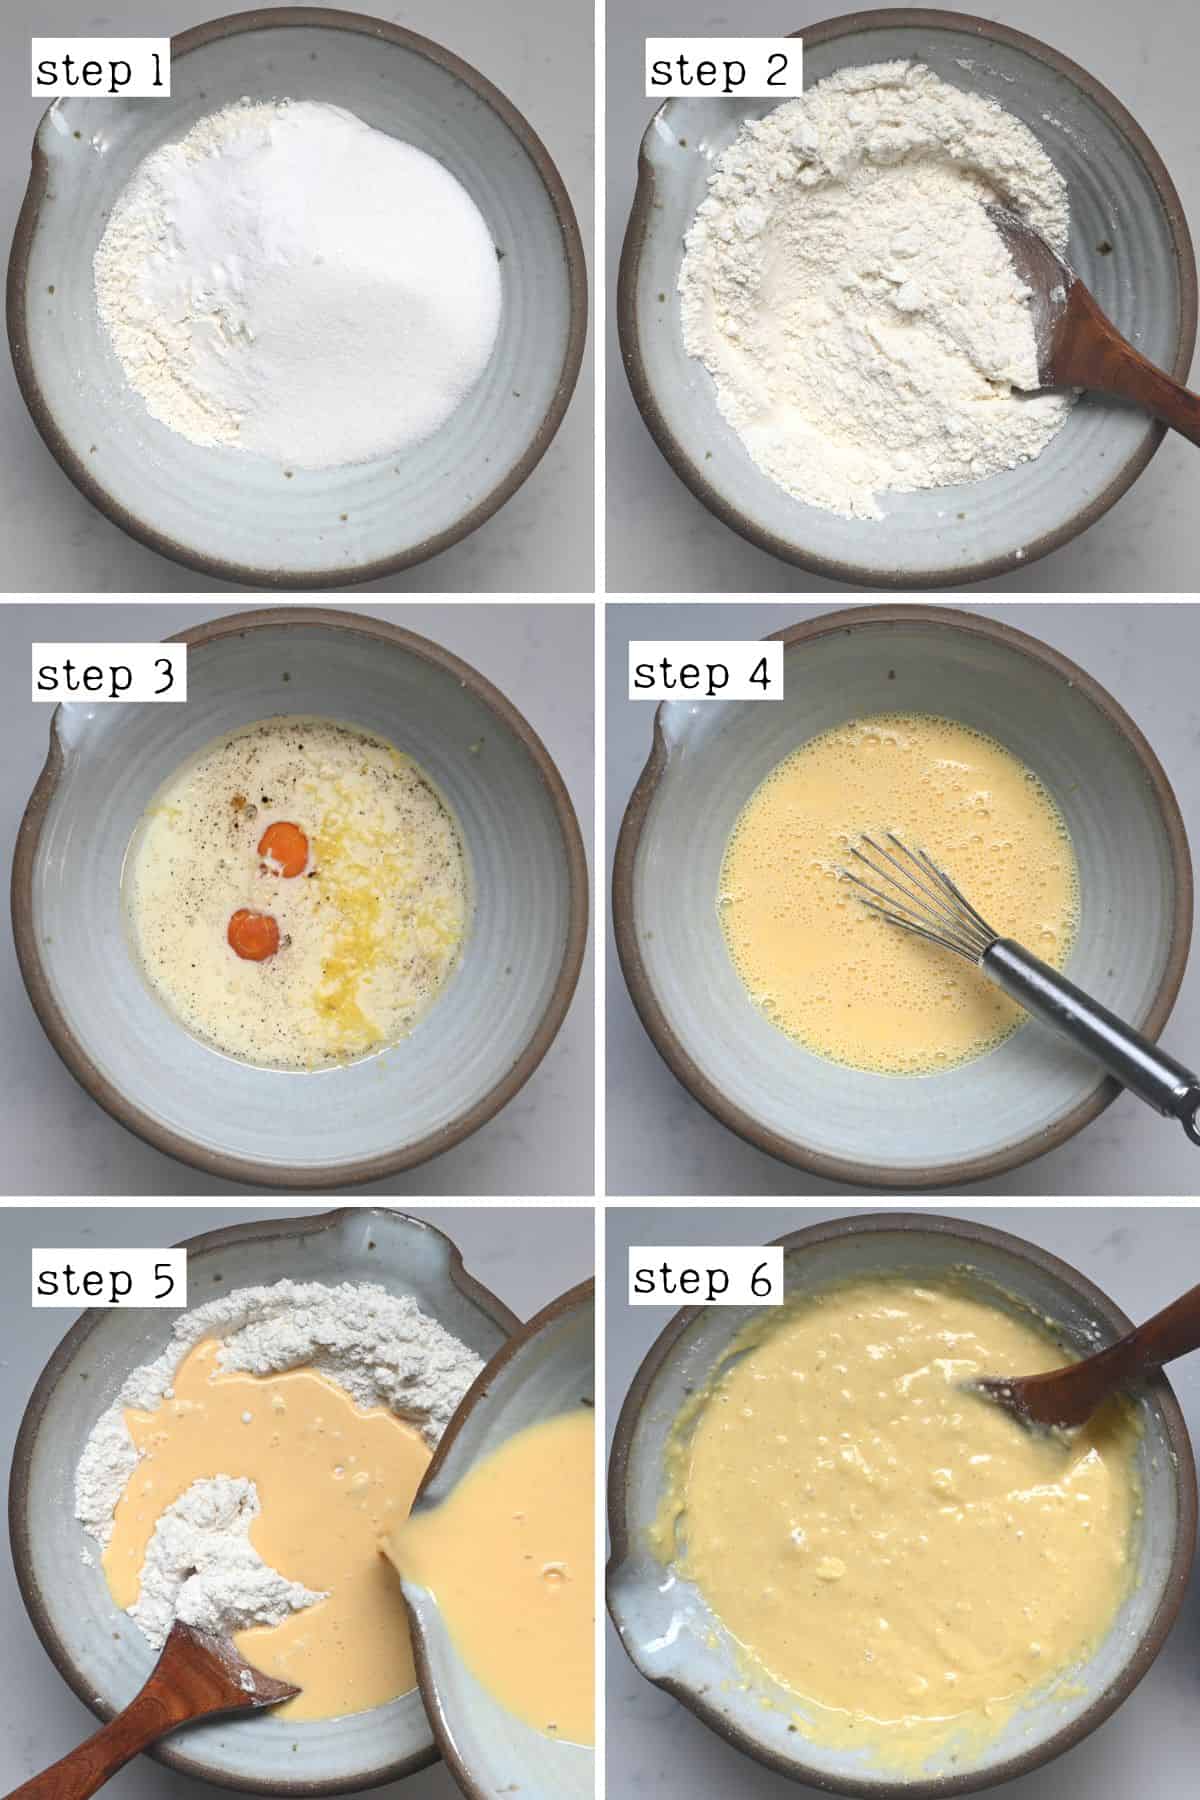 Steps for mixing dry and wet ingredients for cake